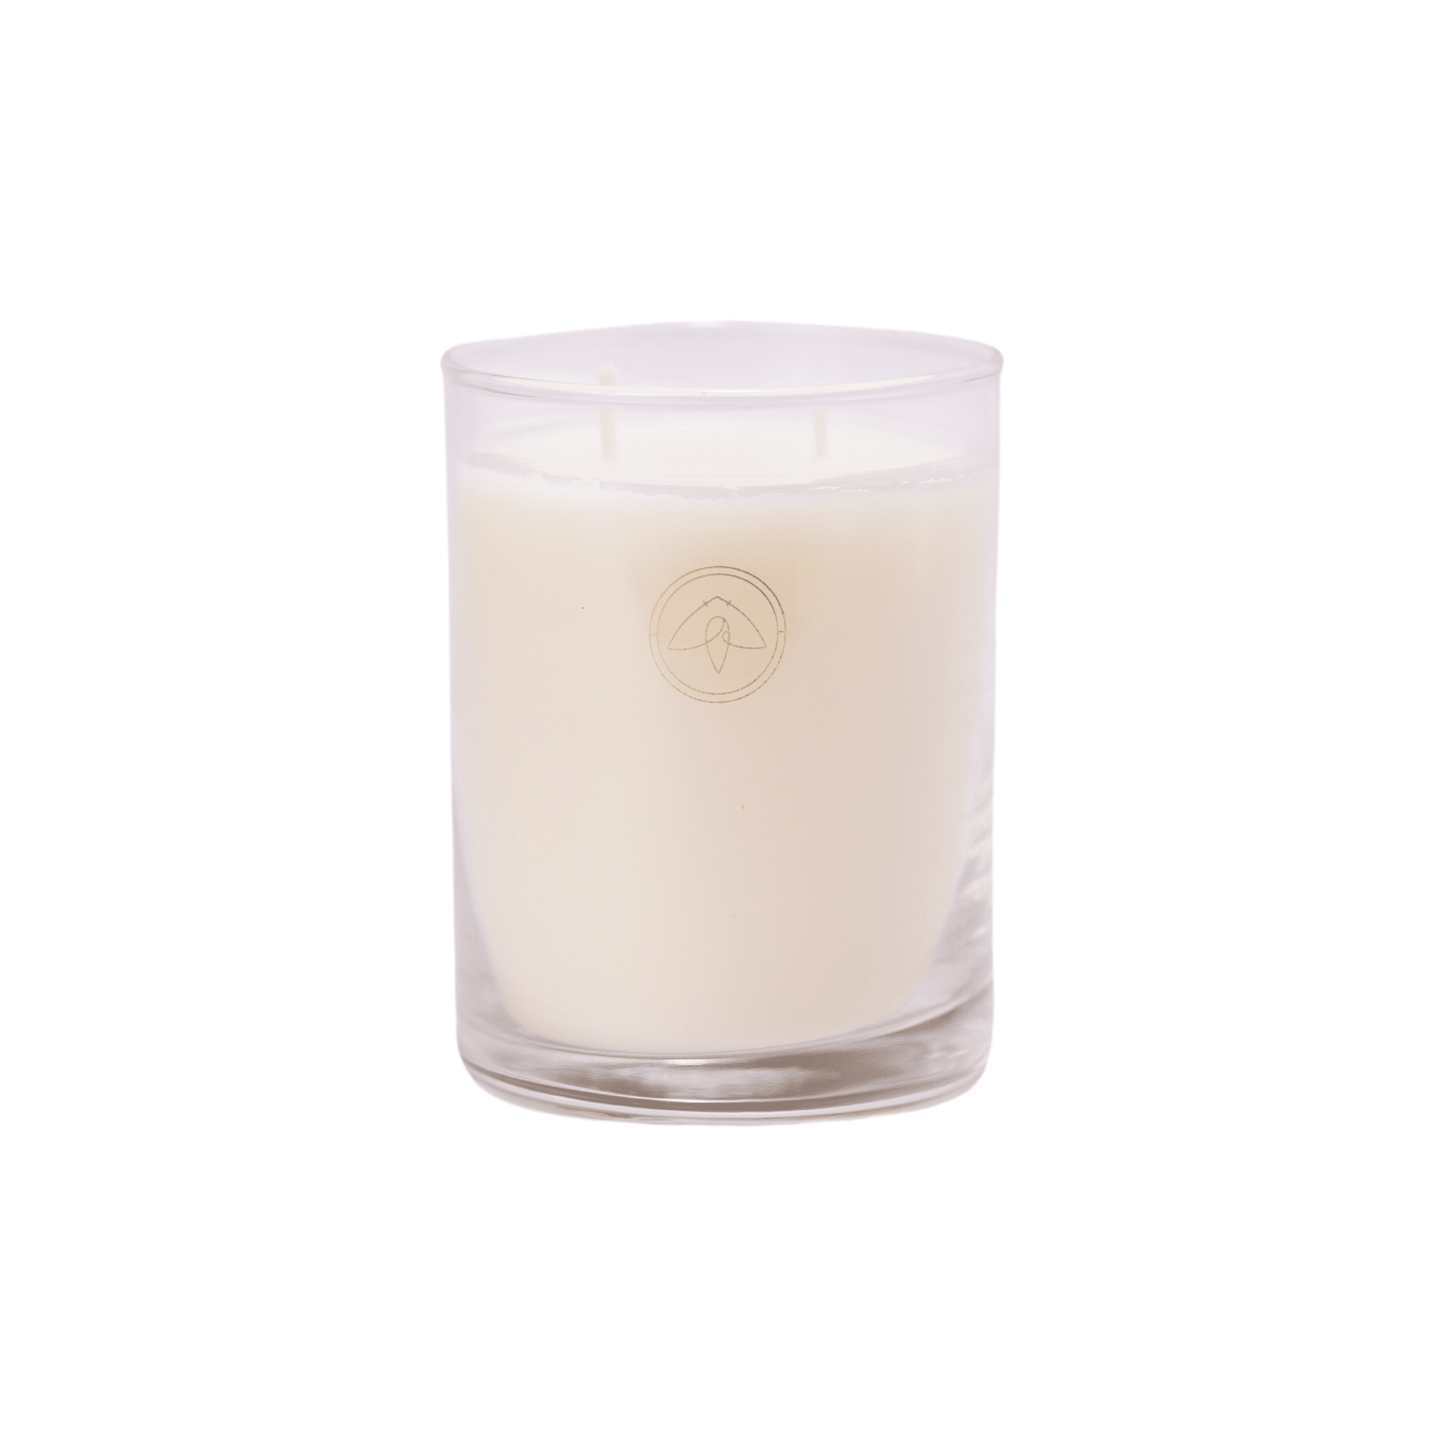 Clarity Shoreside Fire 10 candle in glass vessel